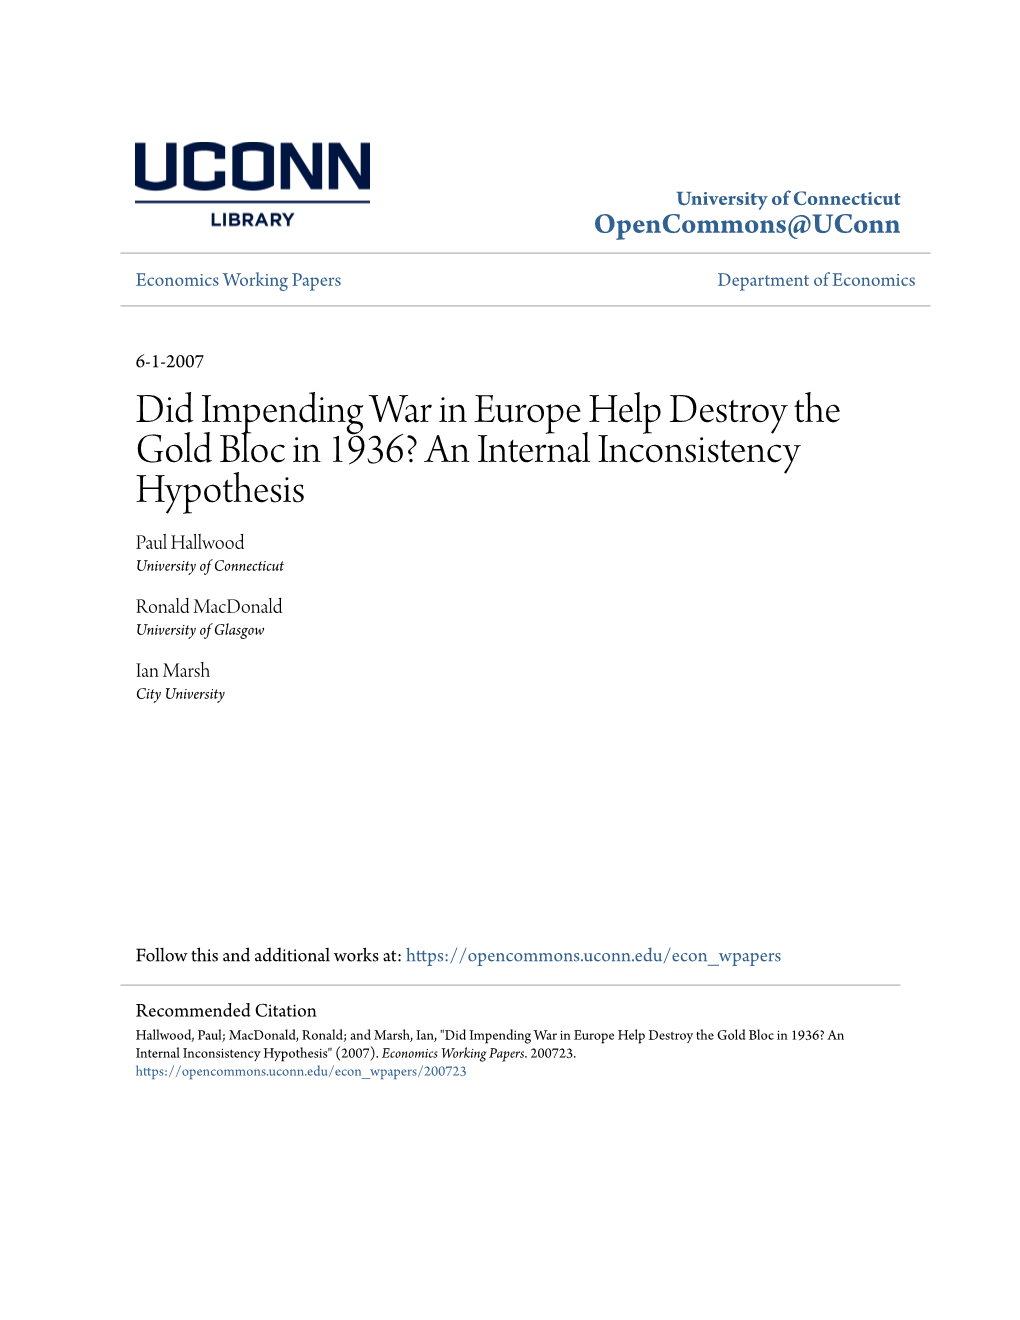 Did Impending War in Europe Help Destroy the Gold Bloc in 1936? an Internal Inconsistency Hypothesis Paul Hallwood University of Connecticut